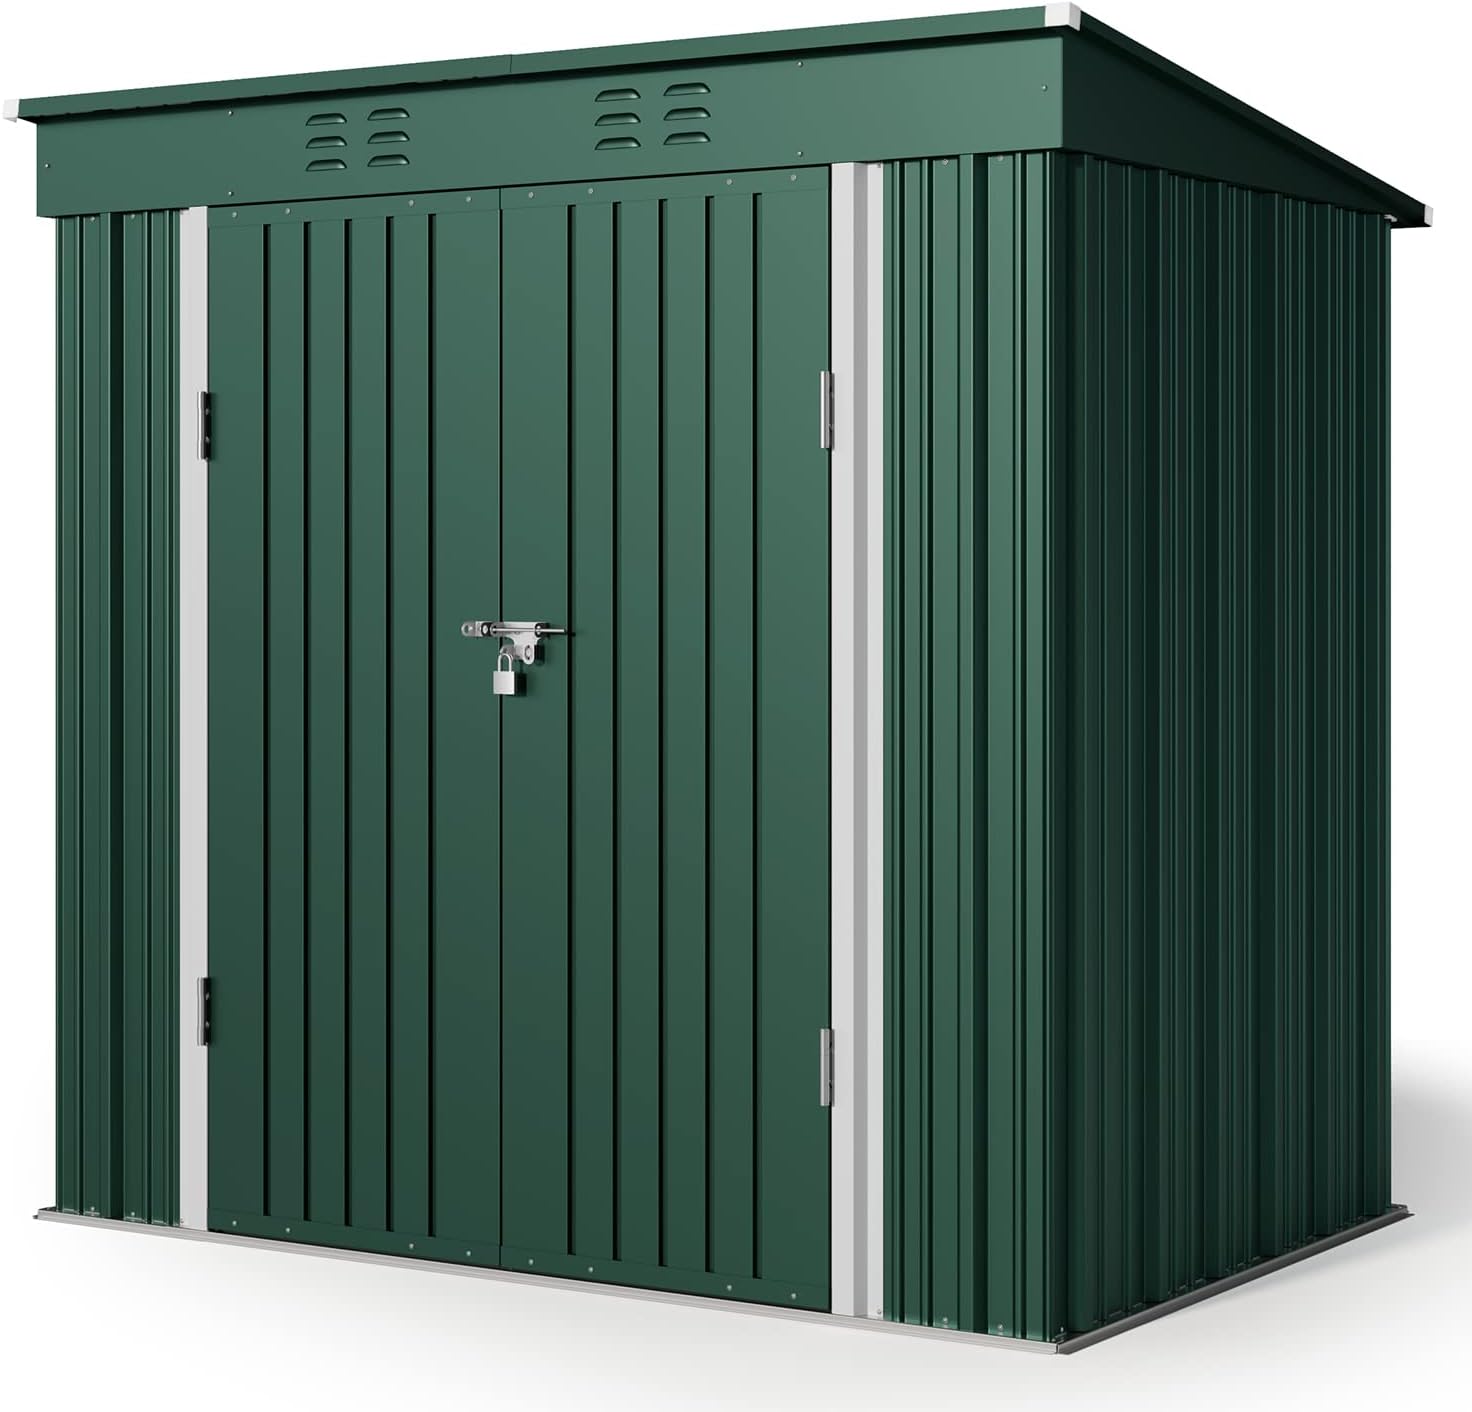 Outdoor Storage Shed, 6' x 4' Outdoor Storage Shed Clearance for Backyard Patio Lawn, Waterproof Metal Shed Outdoor Storage with Double Lockable Doors and Base Frame, Green - image 1 of 8